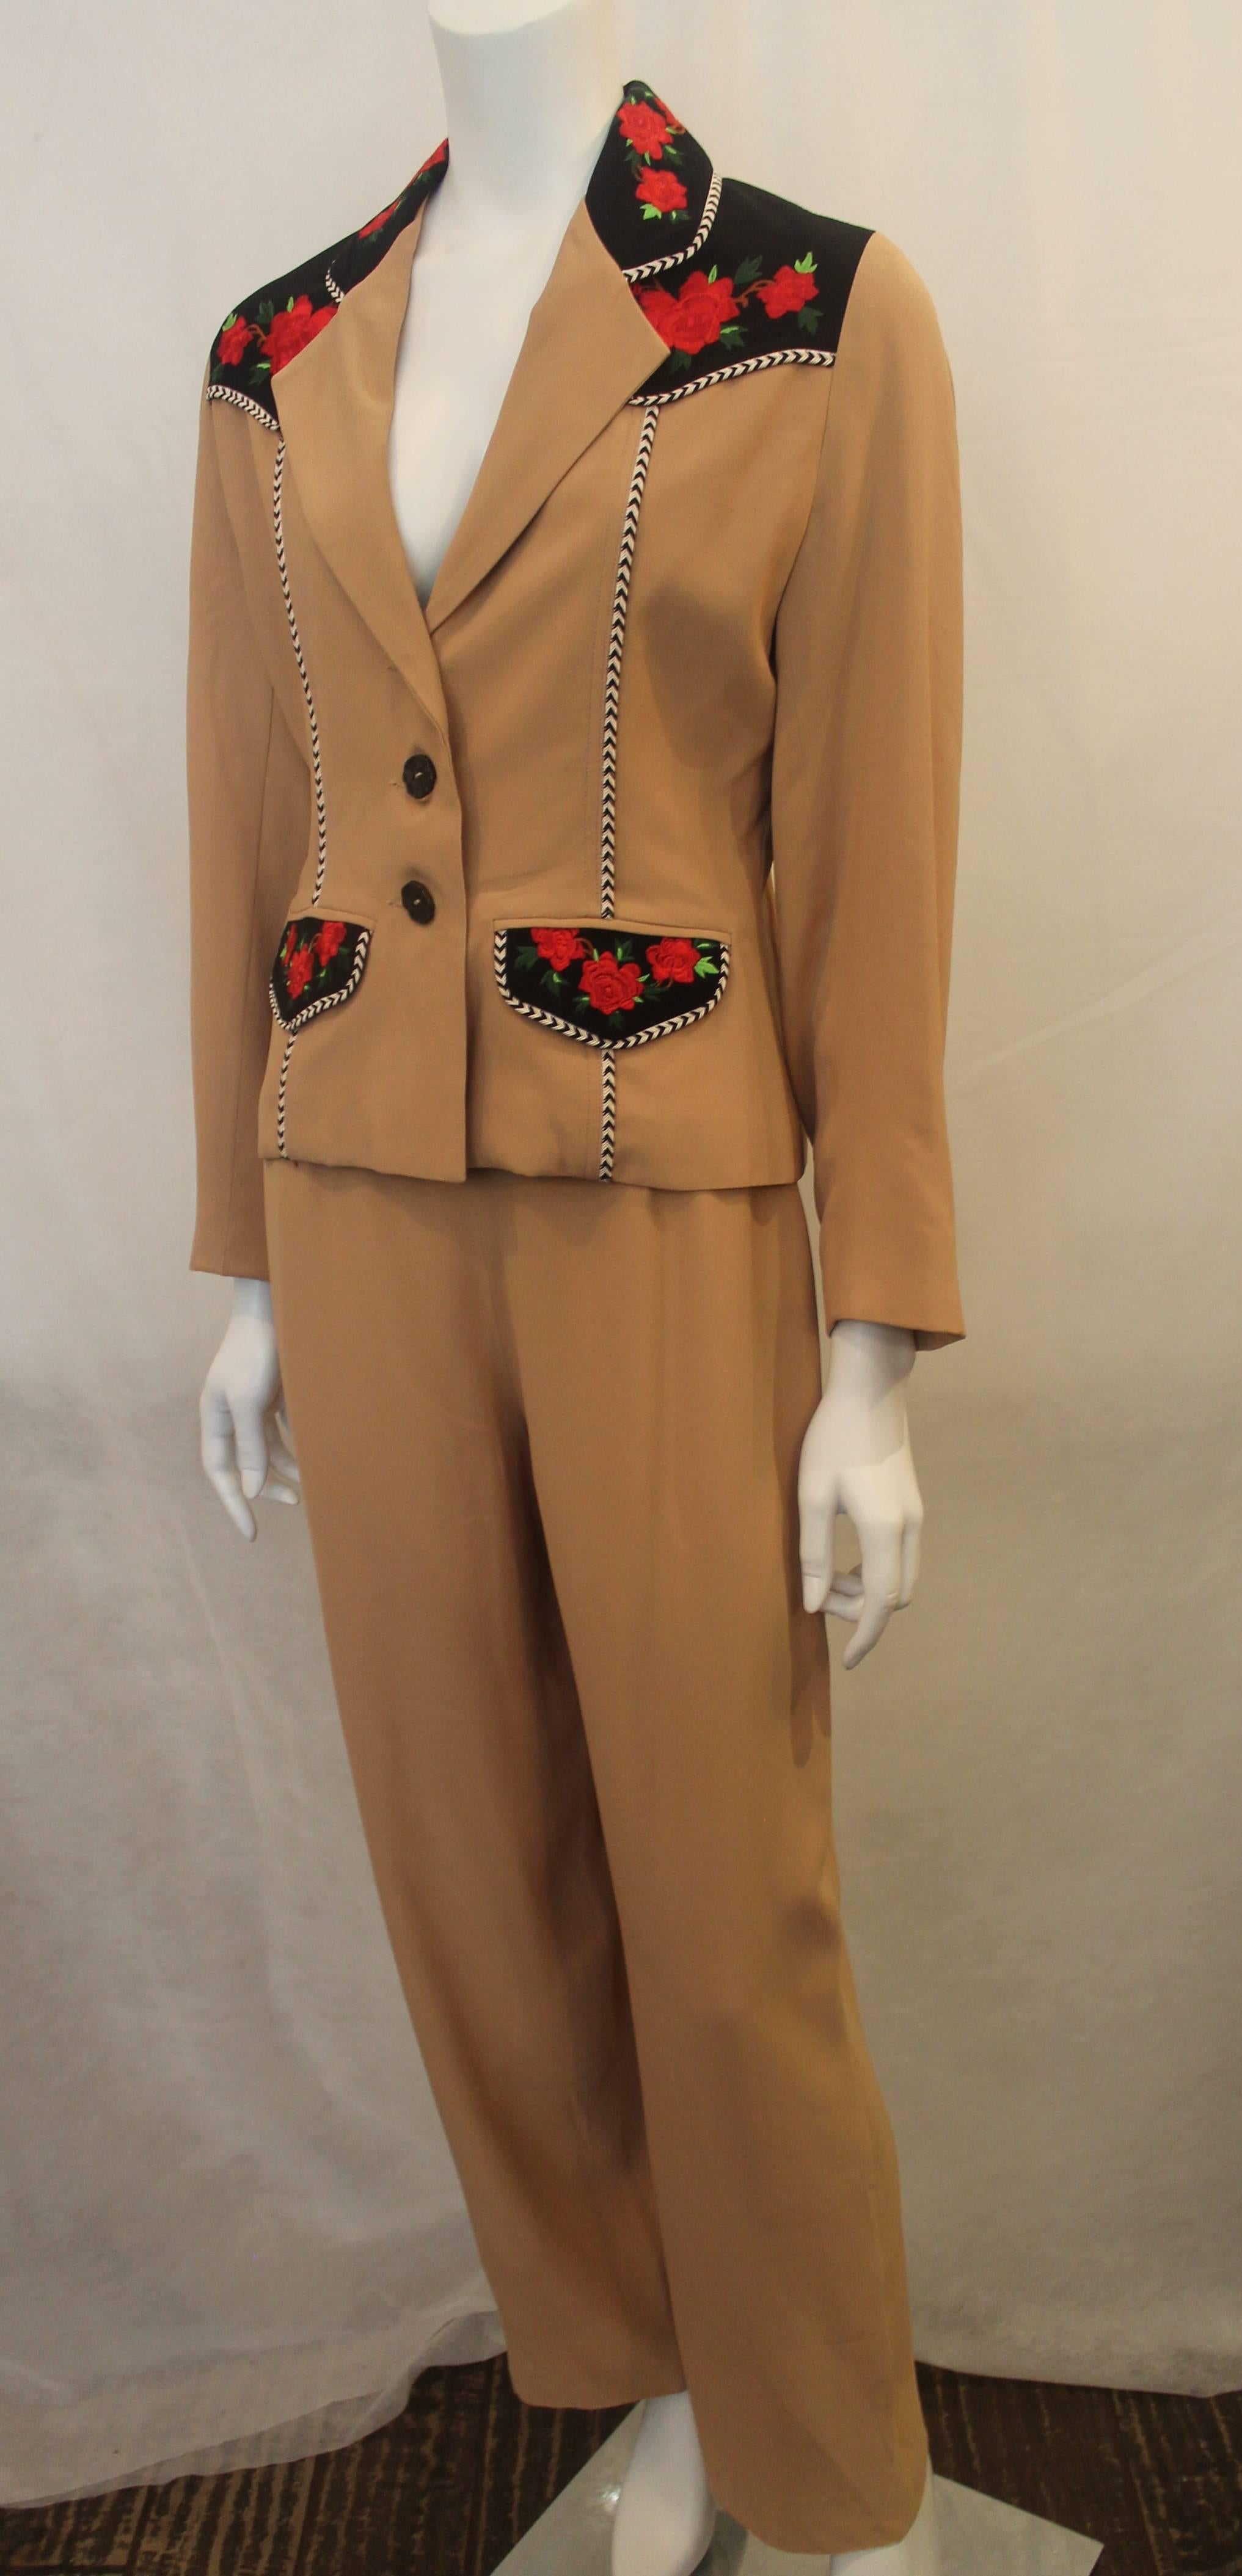 Todd Oldham Tan with Black, Chevron, and Rose Detailing Rayon Suit Set - 8 - 1990's. This set is predominately tan and is composed of rayon. The jacket has some black and ivory chevron trim, buttons, pockets, and red roses with green leaves on black